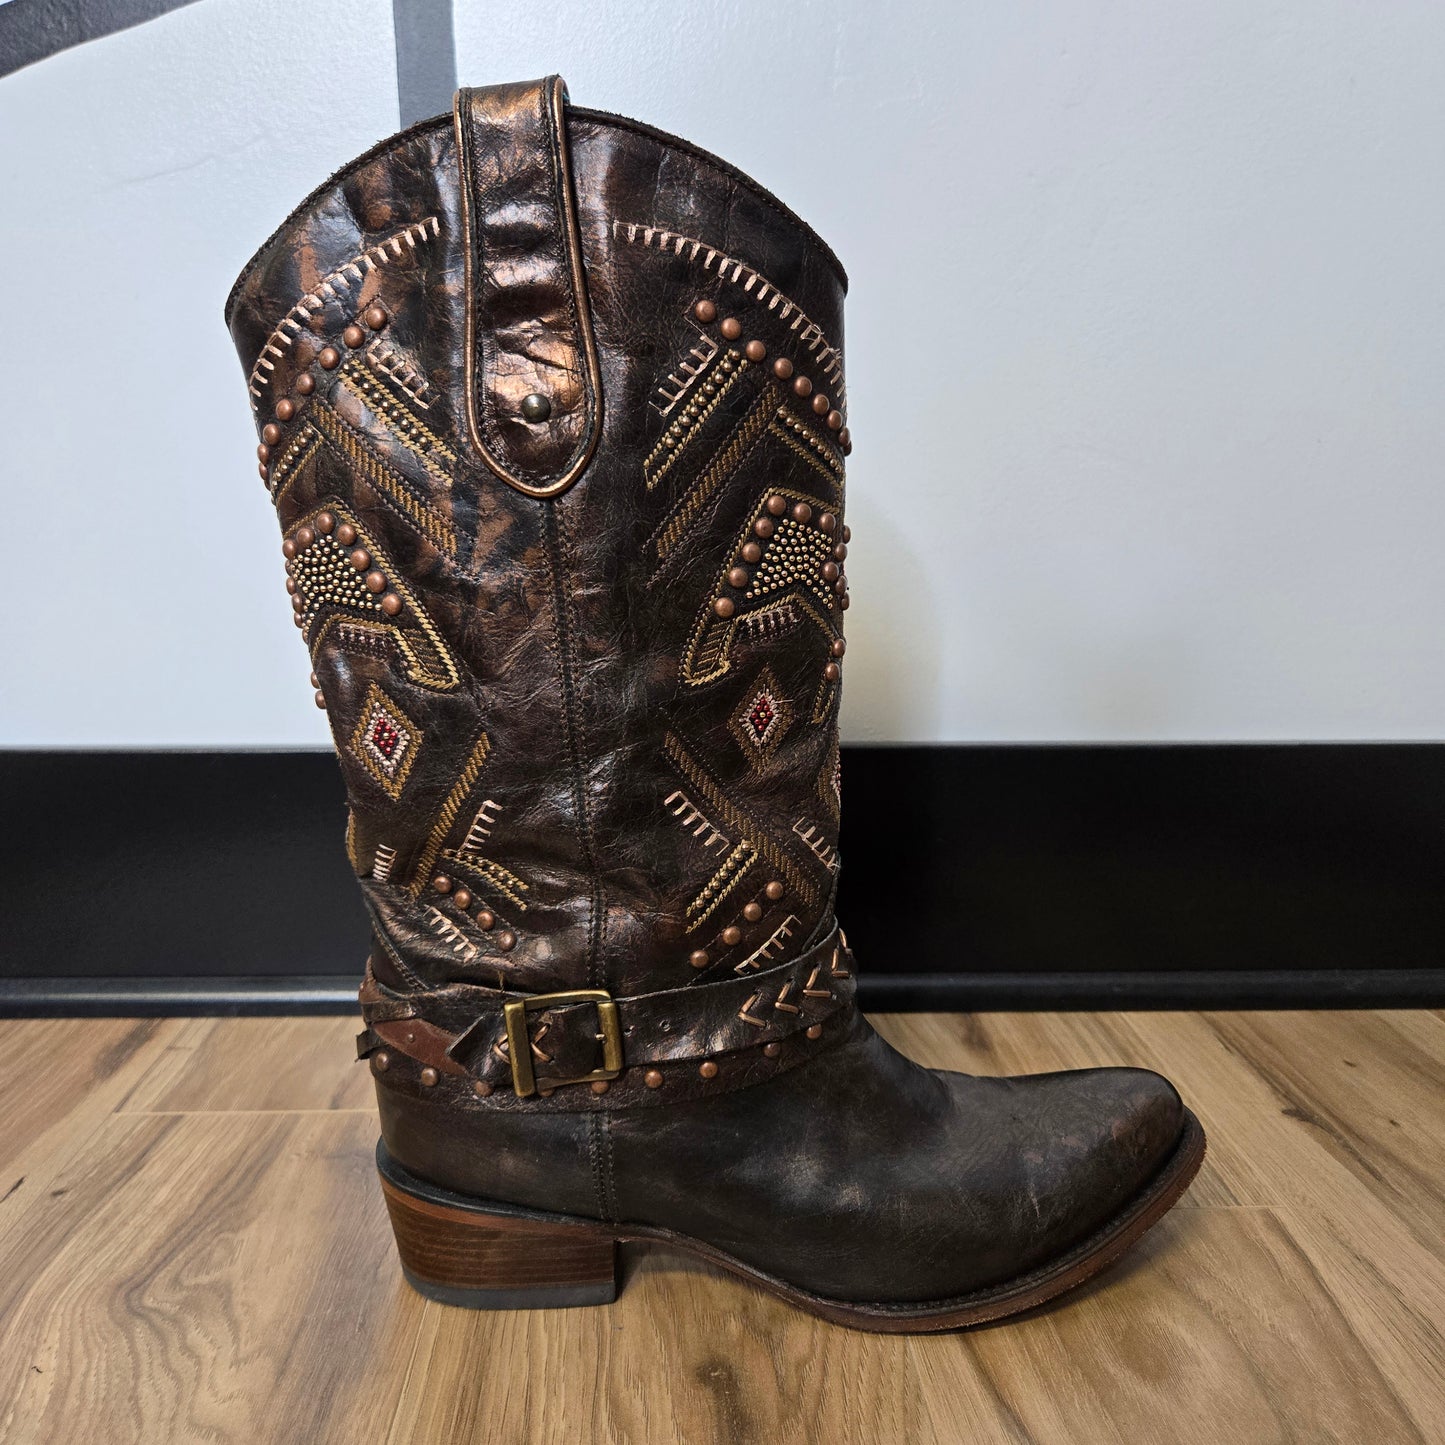 Corral Women's Copper/Red Studded Harness Western Boots